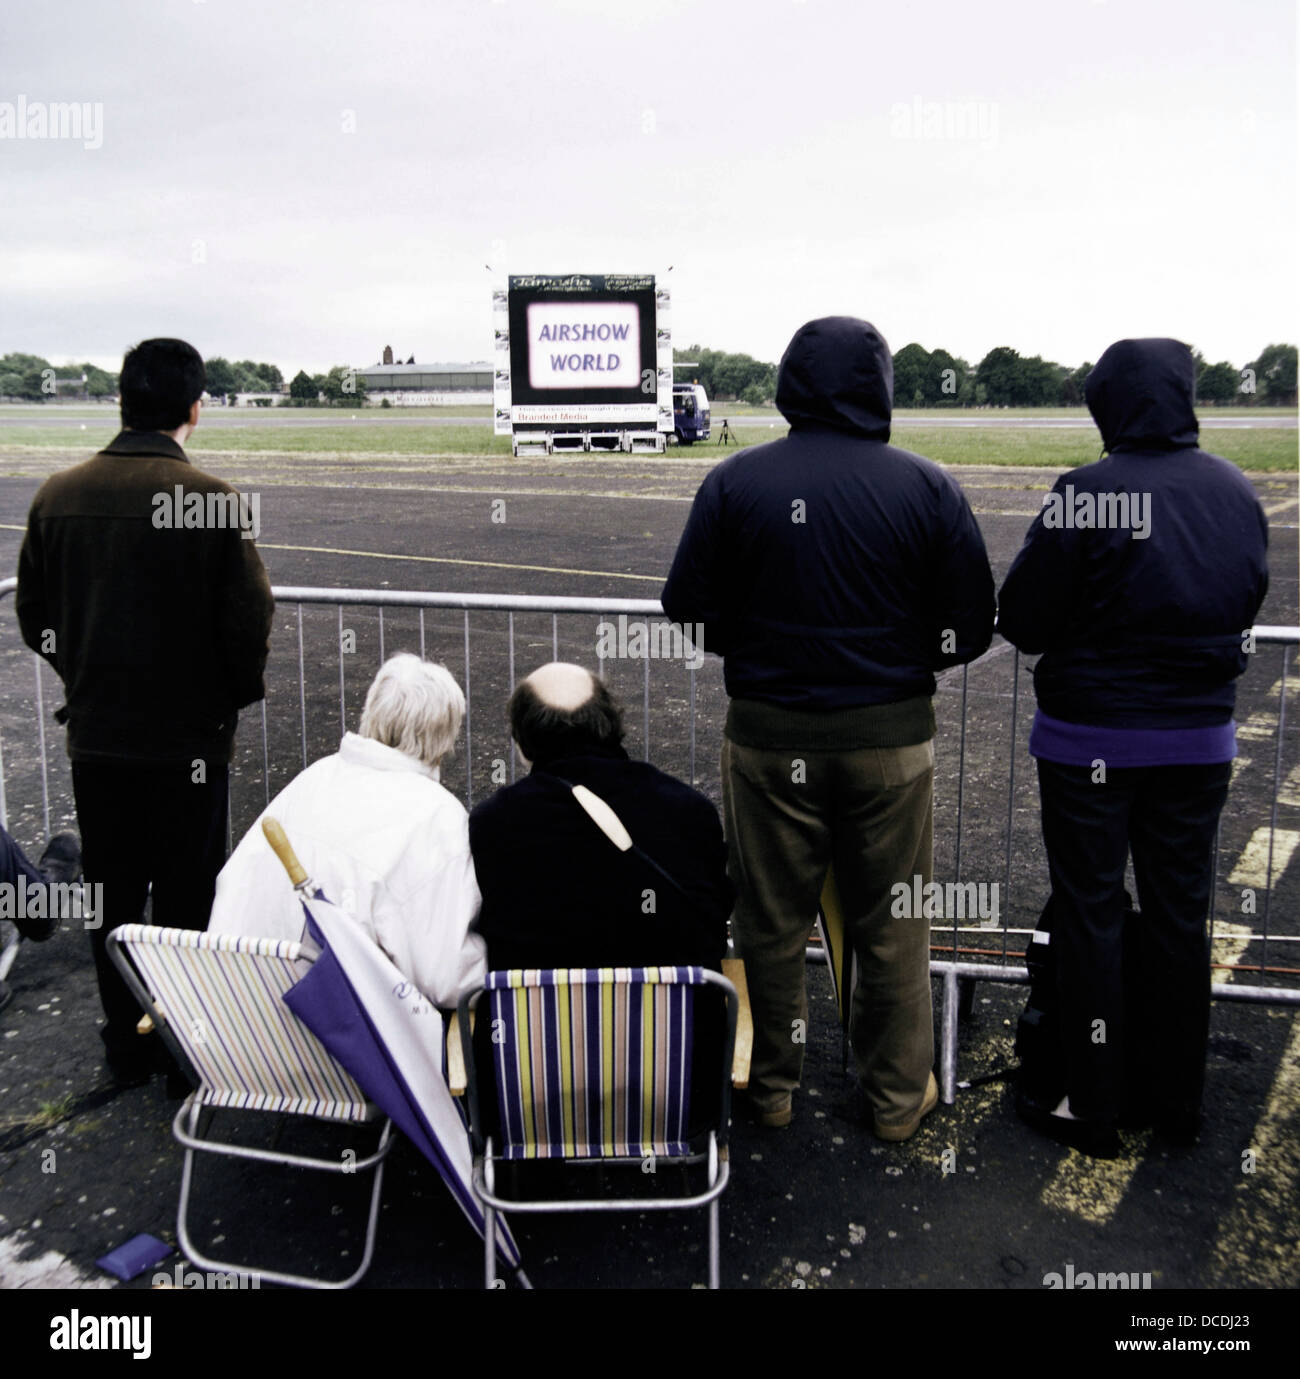 Waiting for the airshow to commence, an aviation enthusiast family huddle in the cold at Mildenhall, a US Air Force base in Suffolk, England. Stock Photo